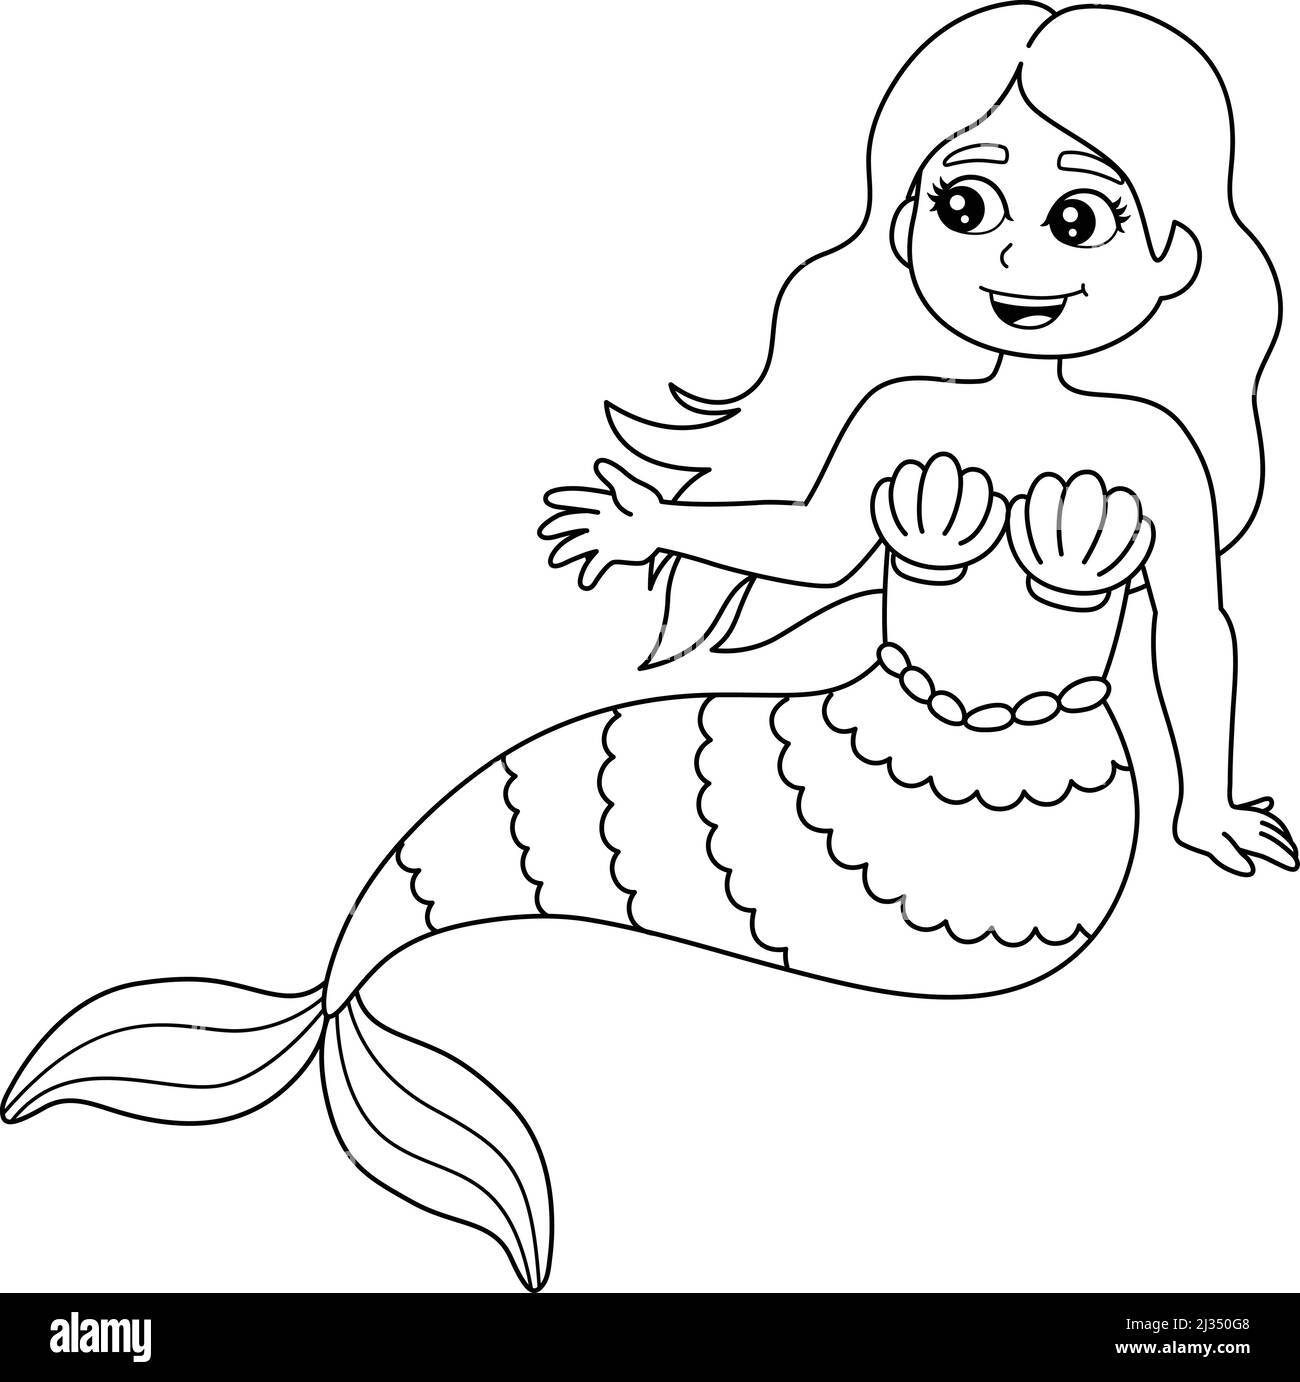 Mermaid Sitting In A Shell Coloring Page Isolated Stock Vector